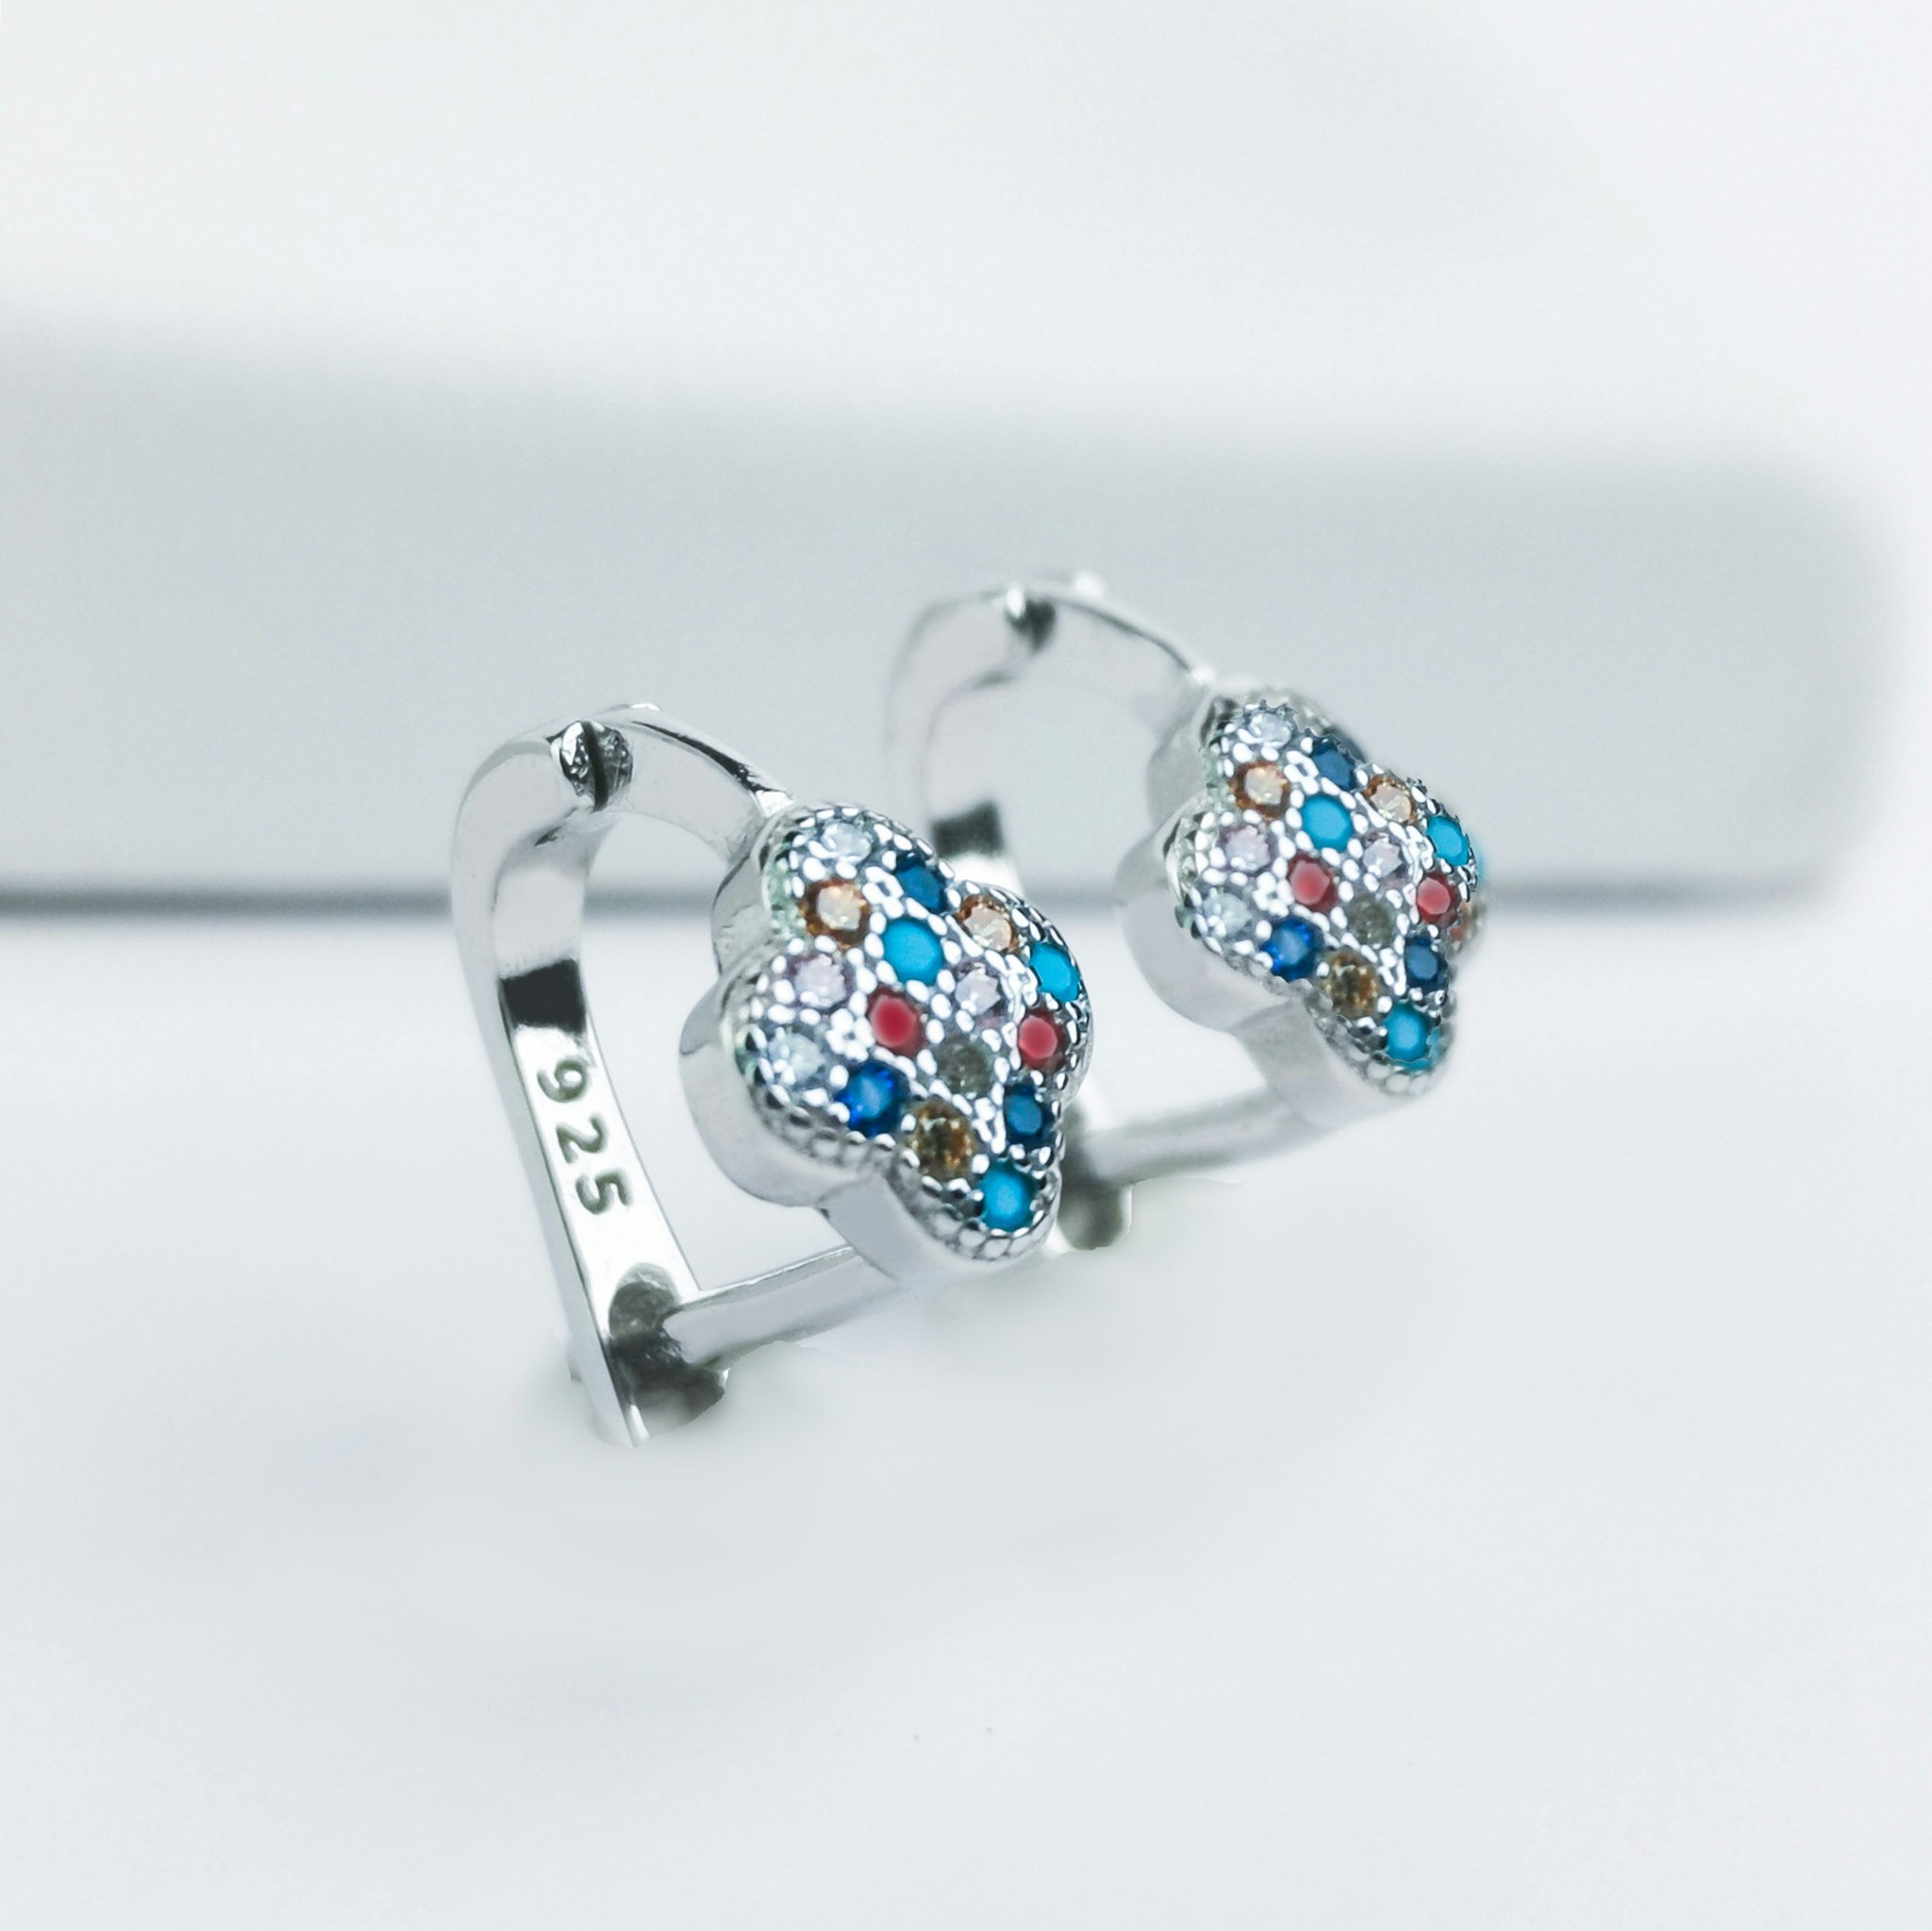 2 - Clover Stones Of Luck Silver Örhänge 925 Modern and trendy earings and women jewelry and accessories